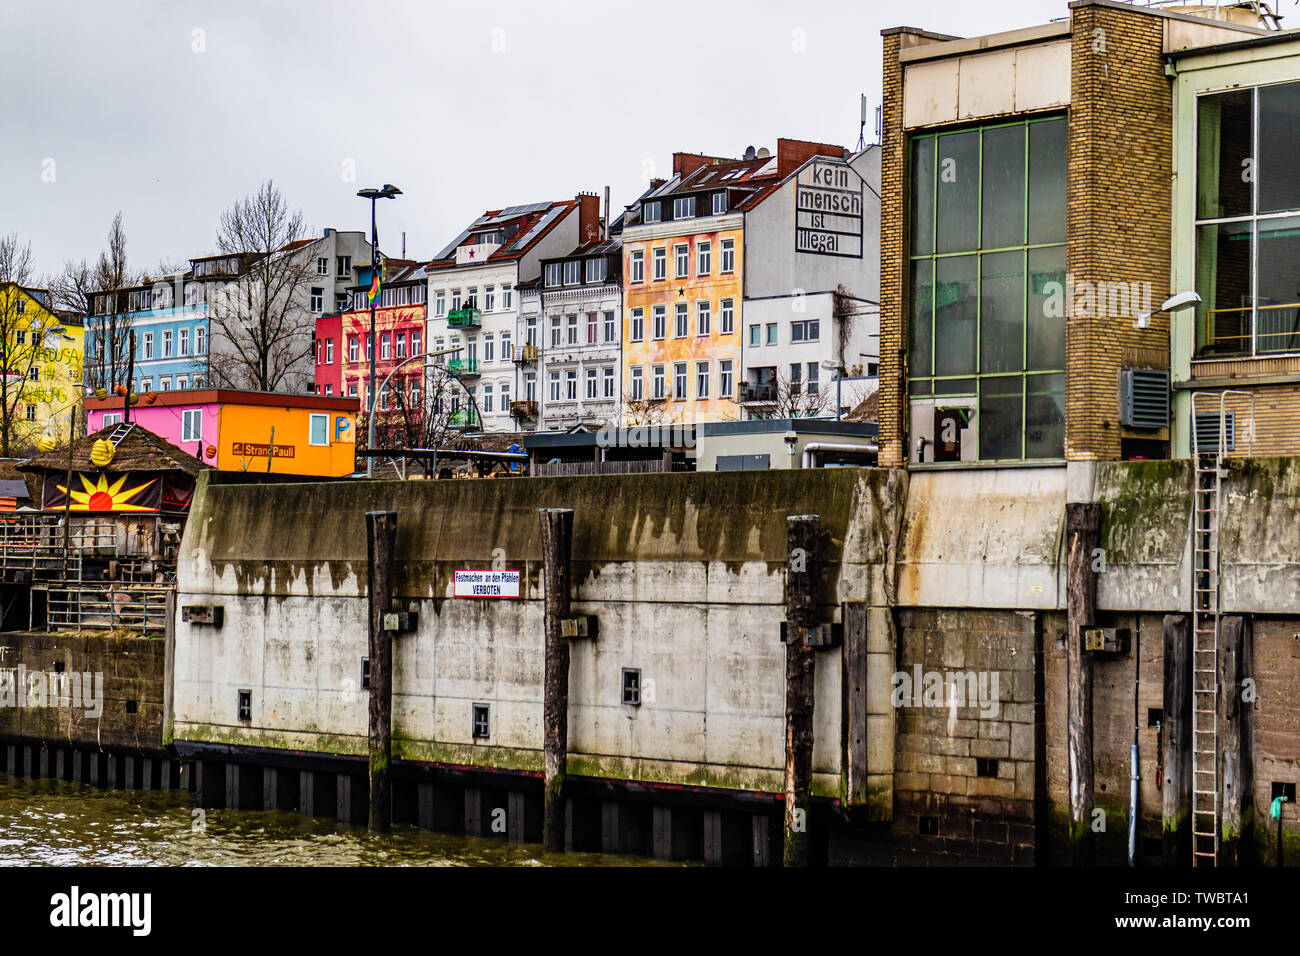 Buildings with graffiti and street art beside the River Elbe in St Pauli, Hamburg, Germany. January 2019. Stock Photo